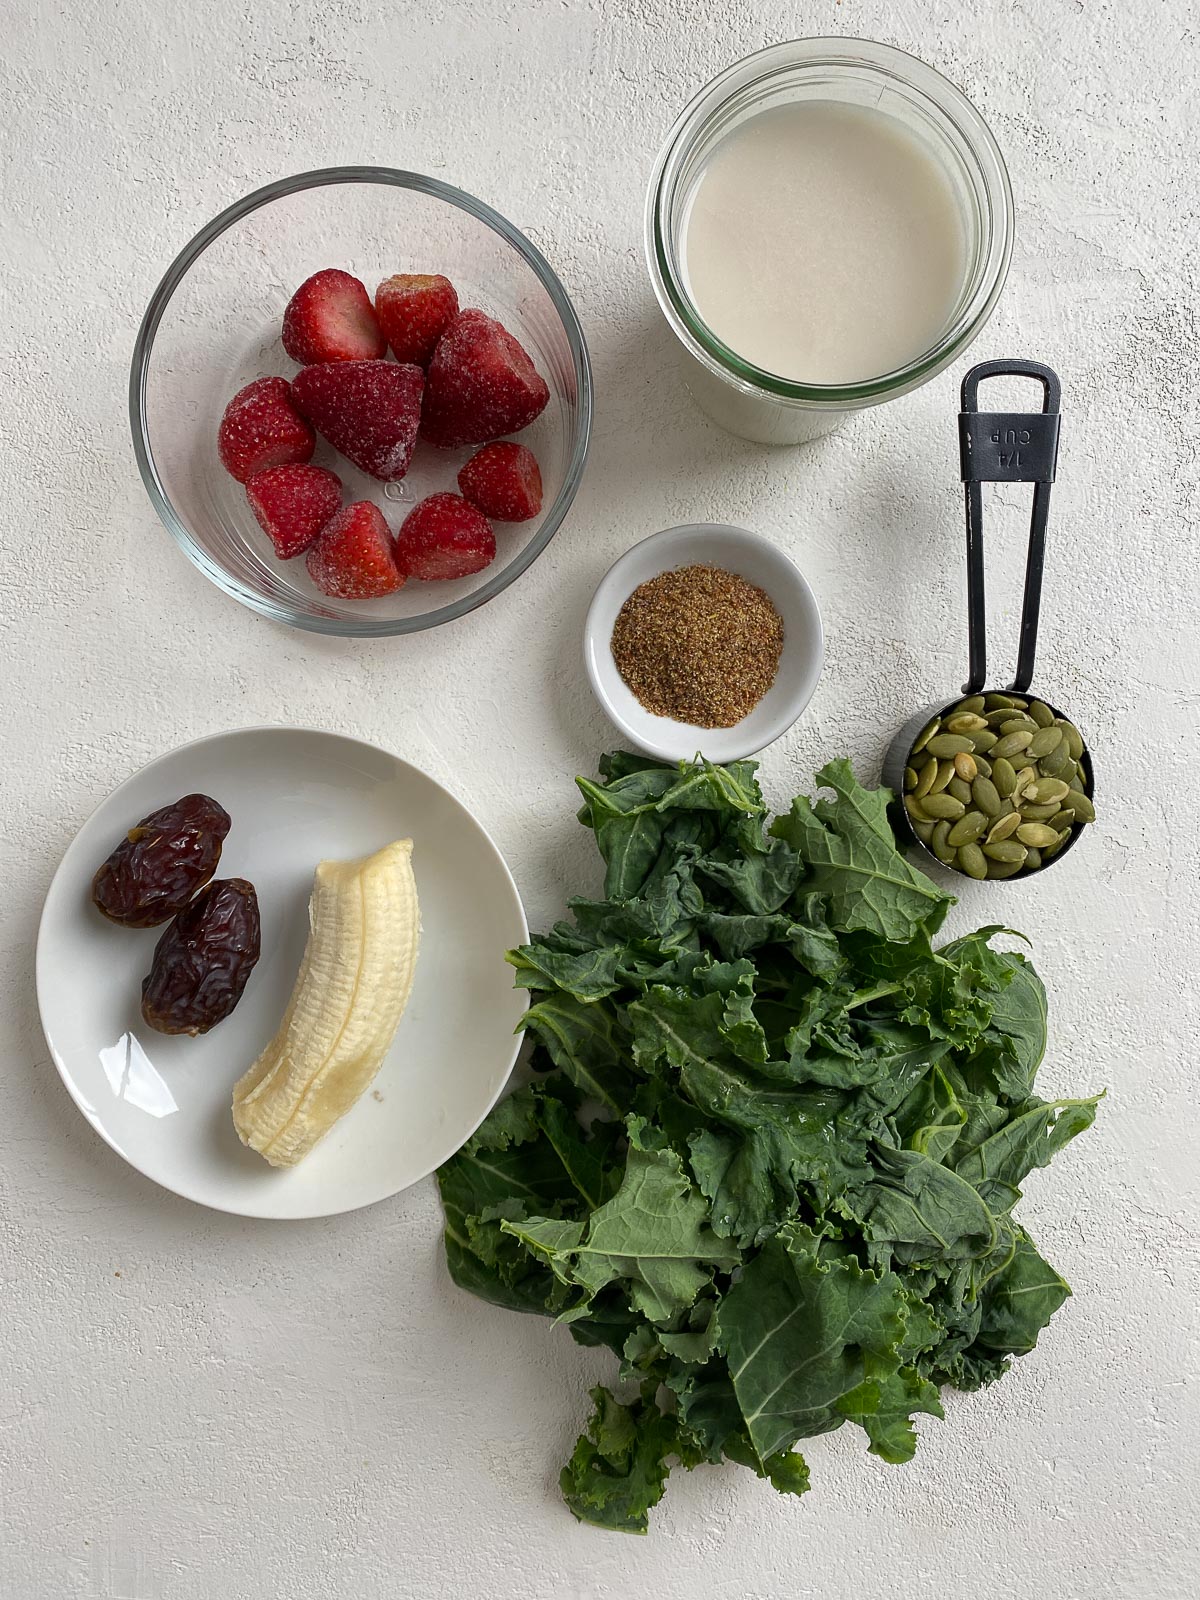 ingredients for Strawberry Kale Smoothie spread out on a white surface